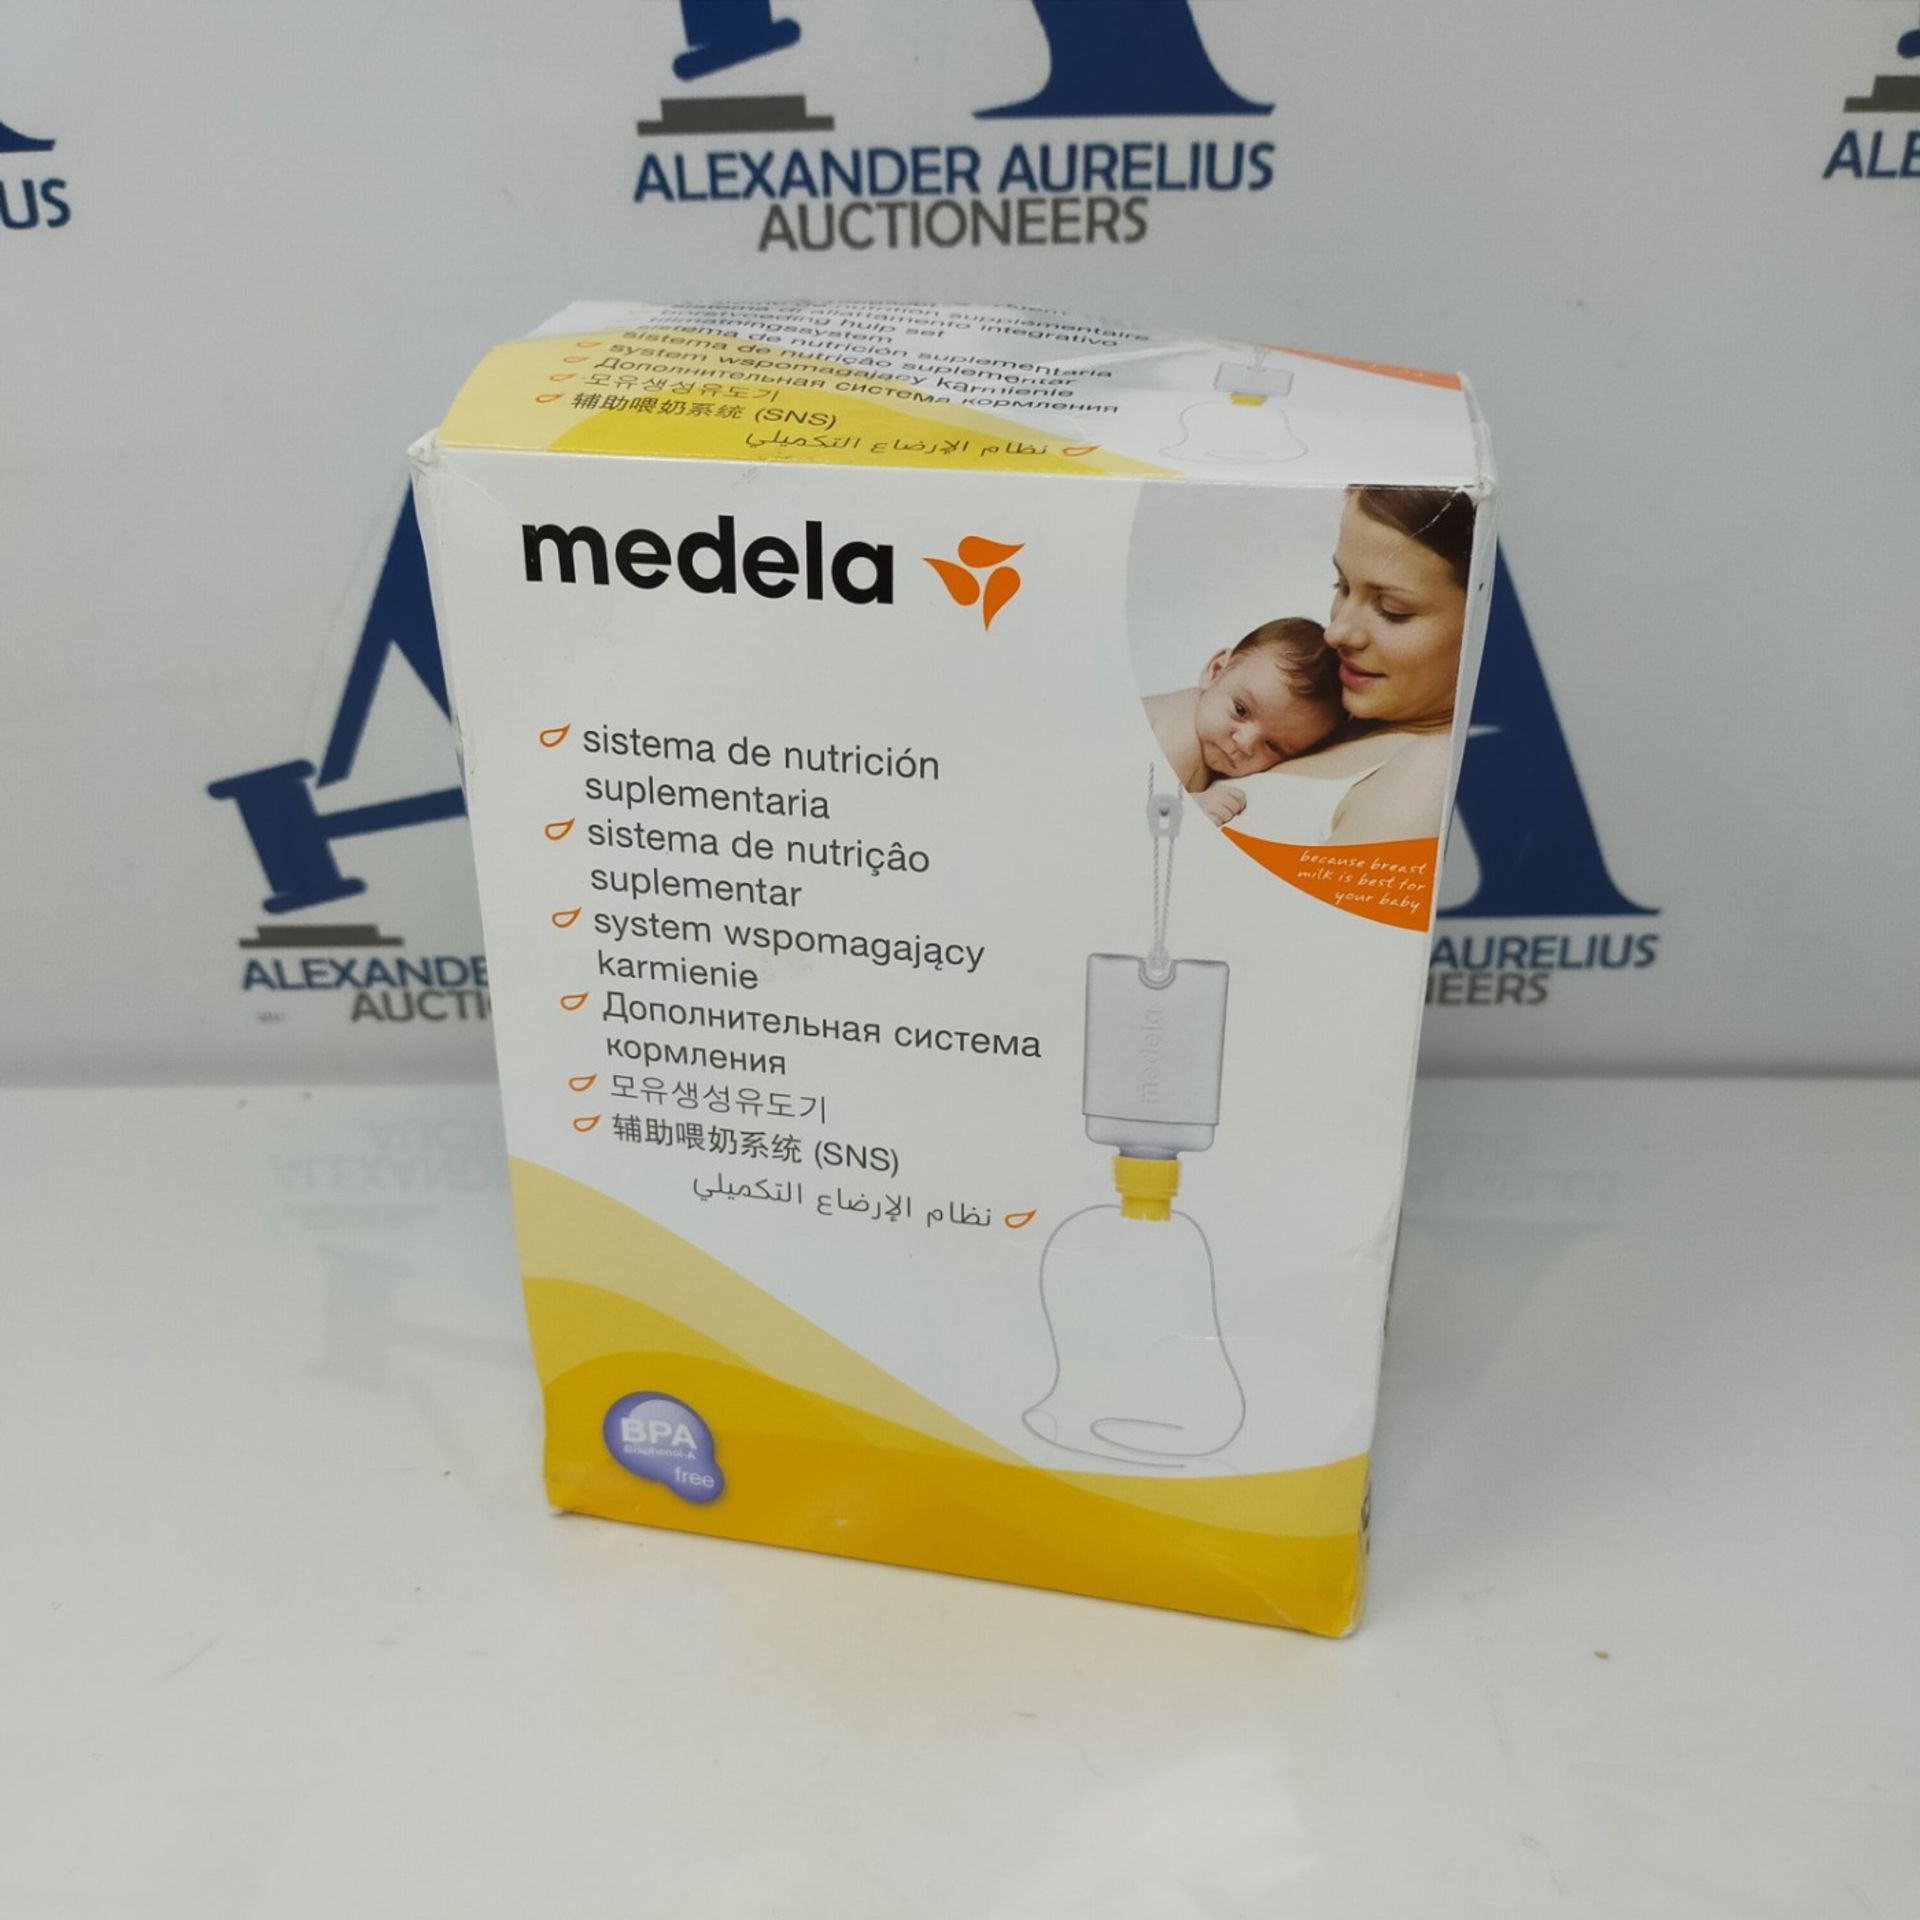 Medela Breast Food Set - Breastfeeding Aid for Extra Milk - with Food Storage Containe - Image 3 of 3